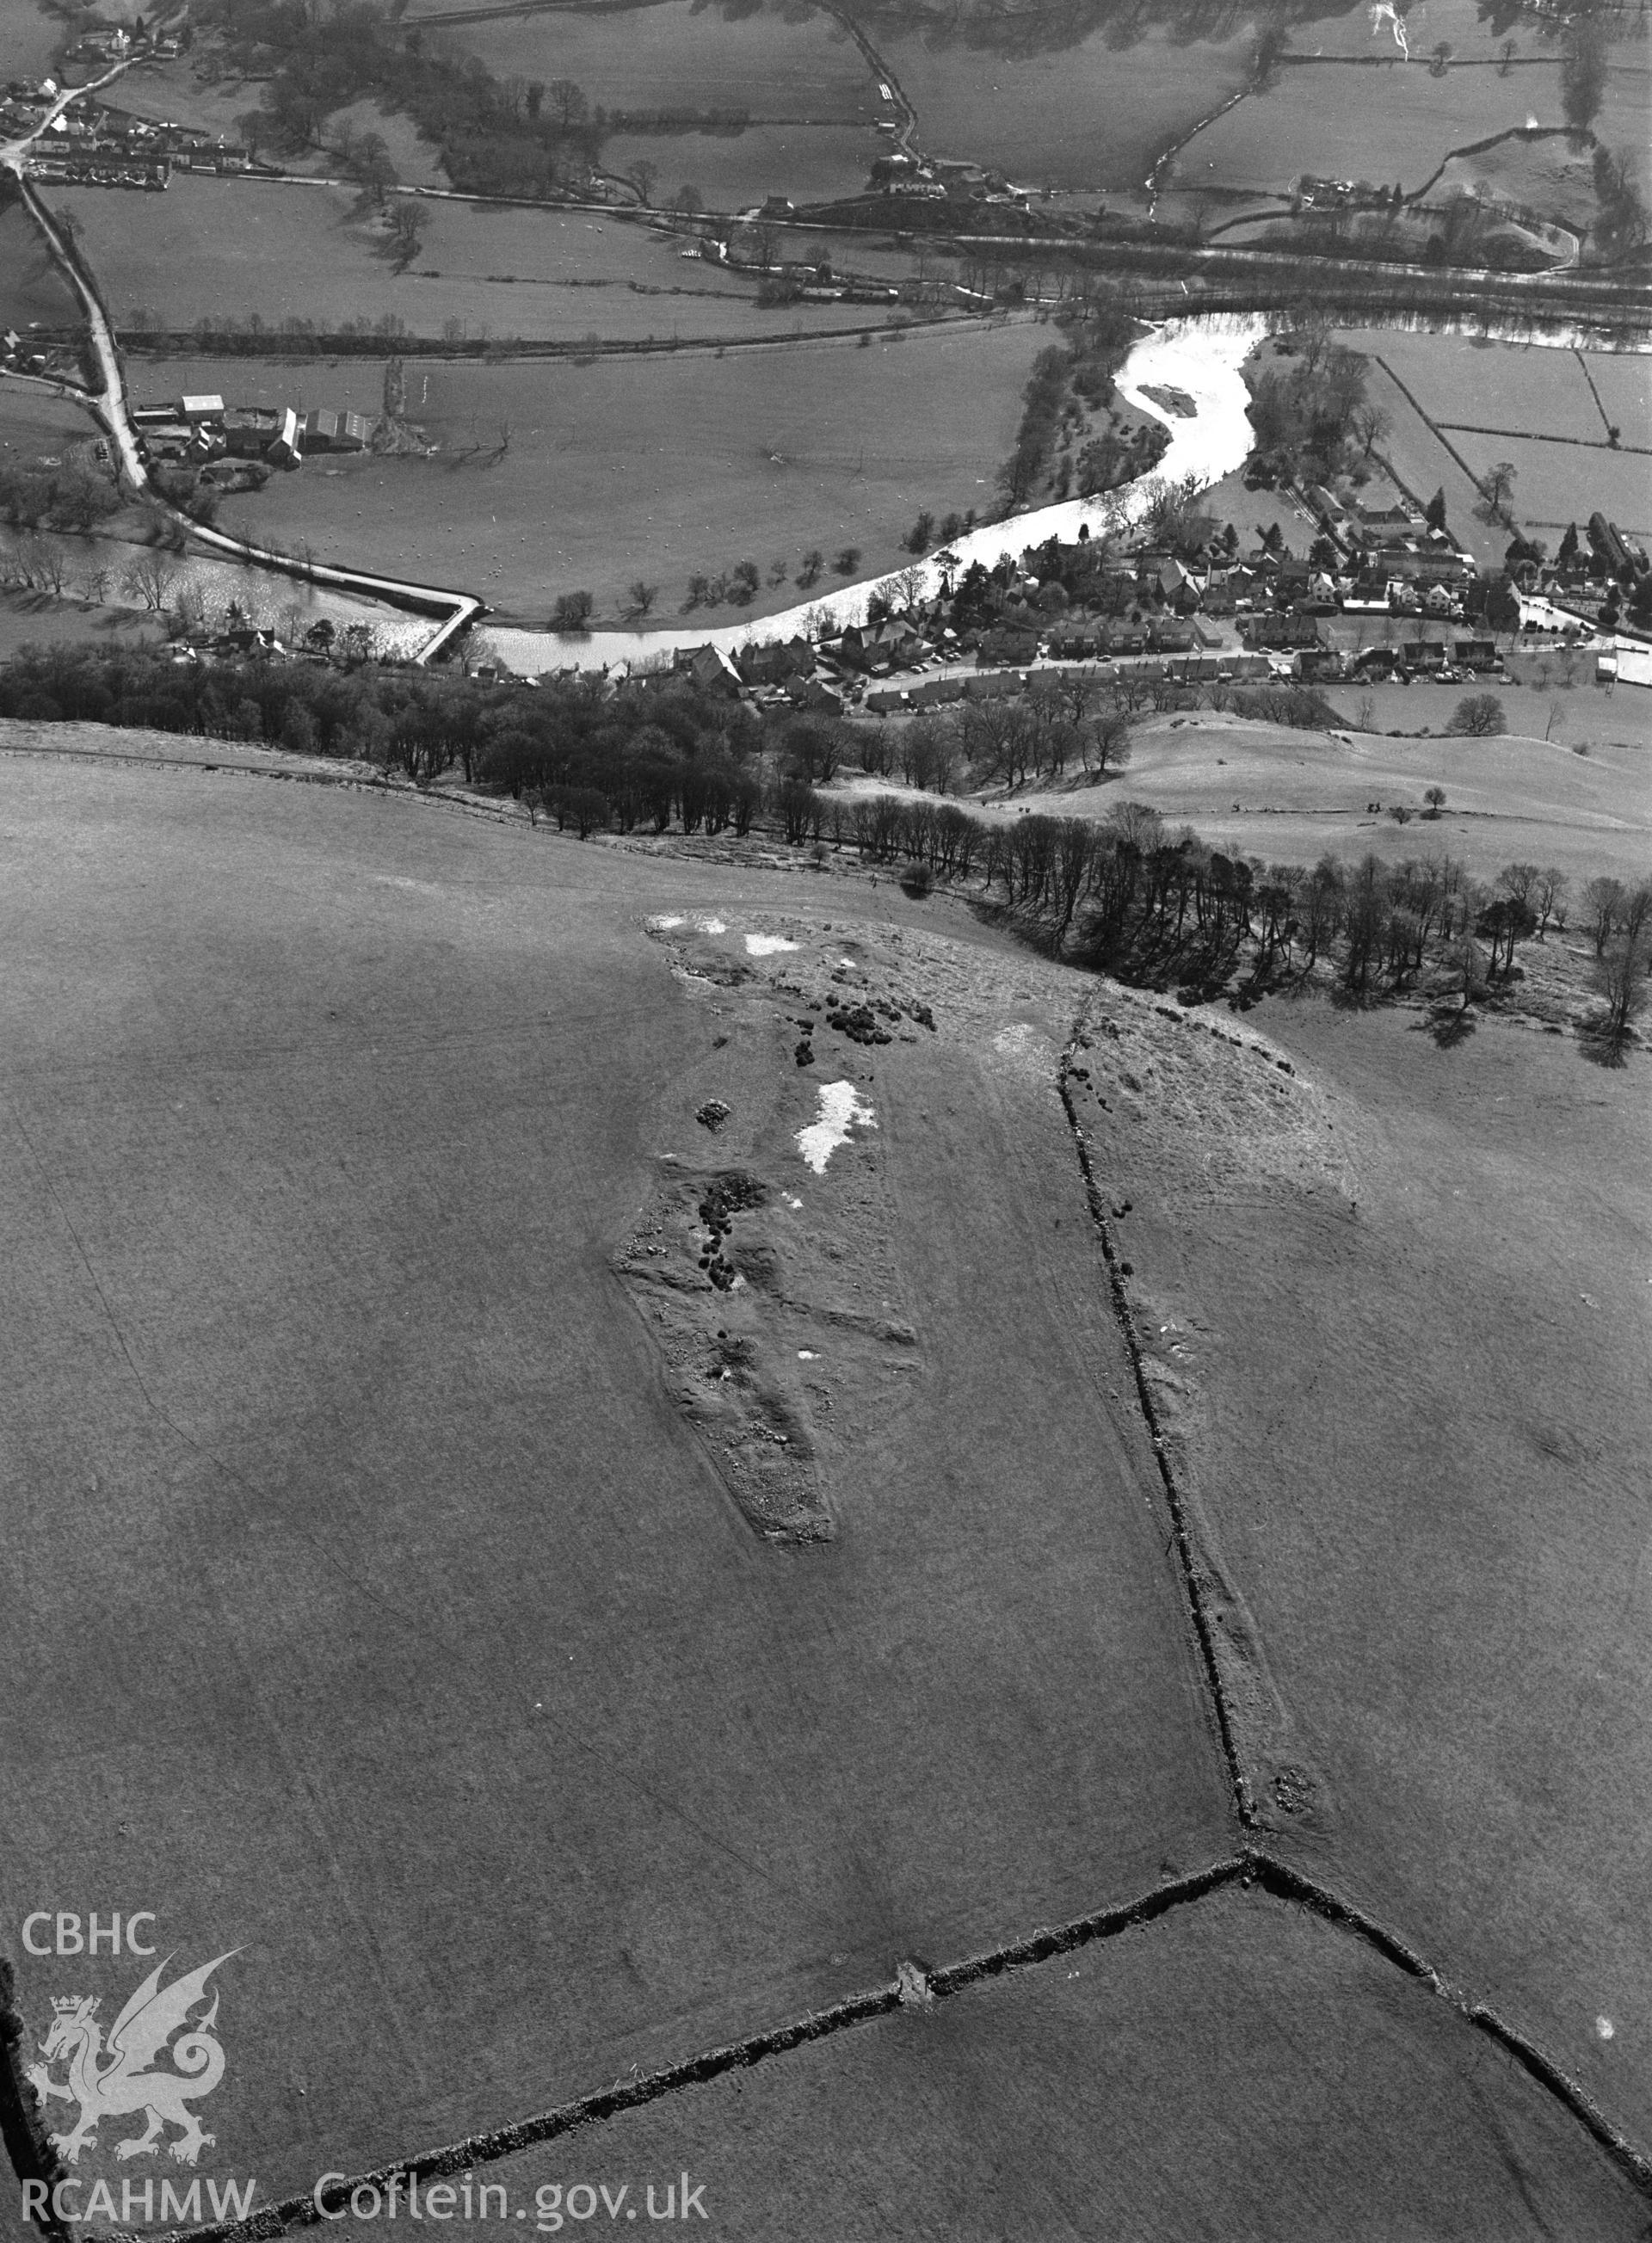 RCAHMW black and white oblique aerial photograph of Carrog Bridge, Earthwork and landscape. Taken by C R Musson on 13/03/1995